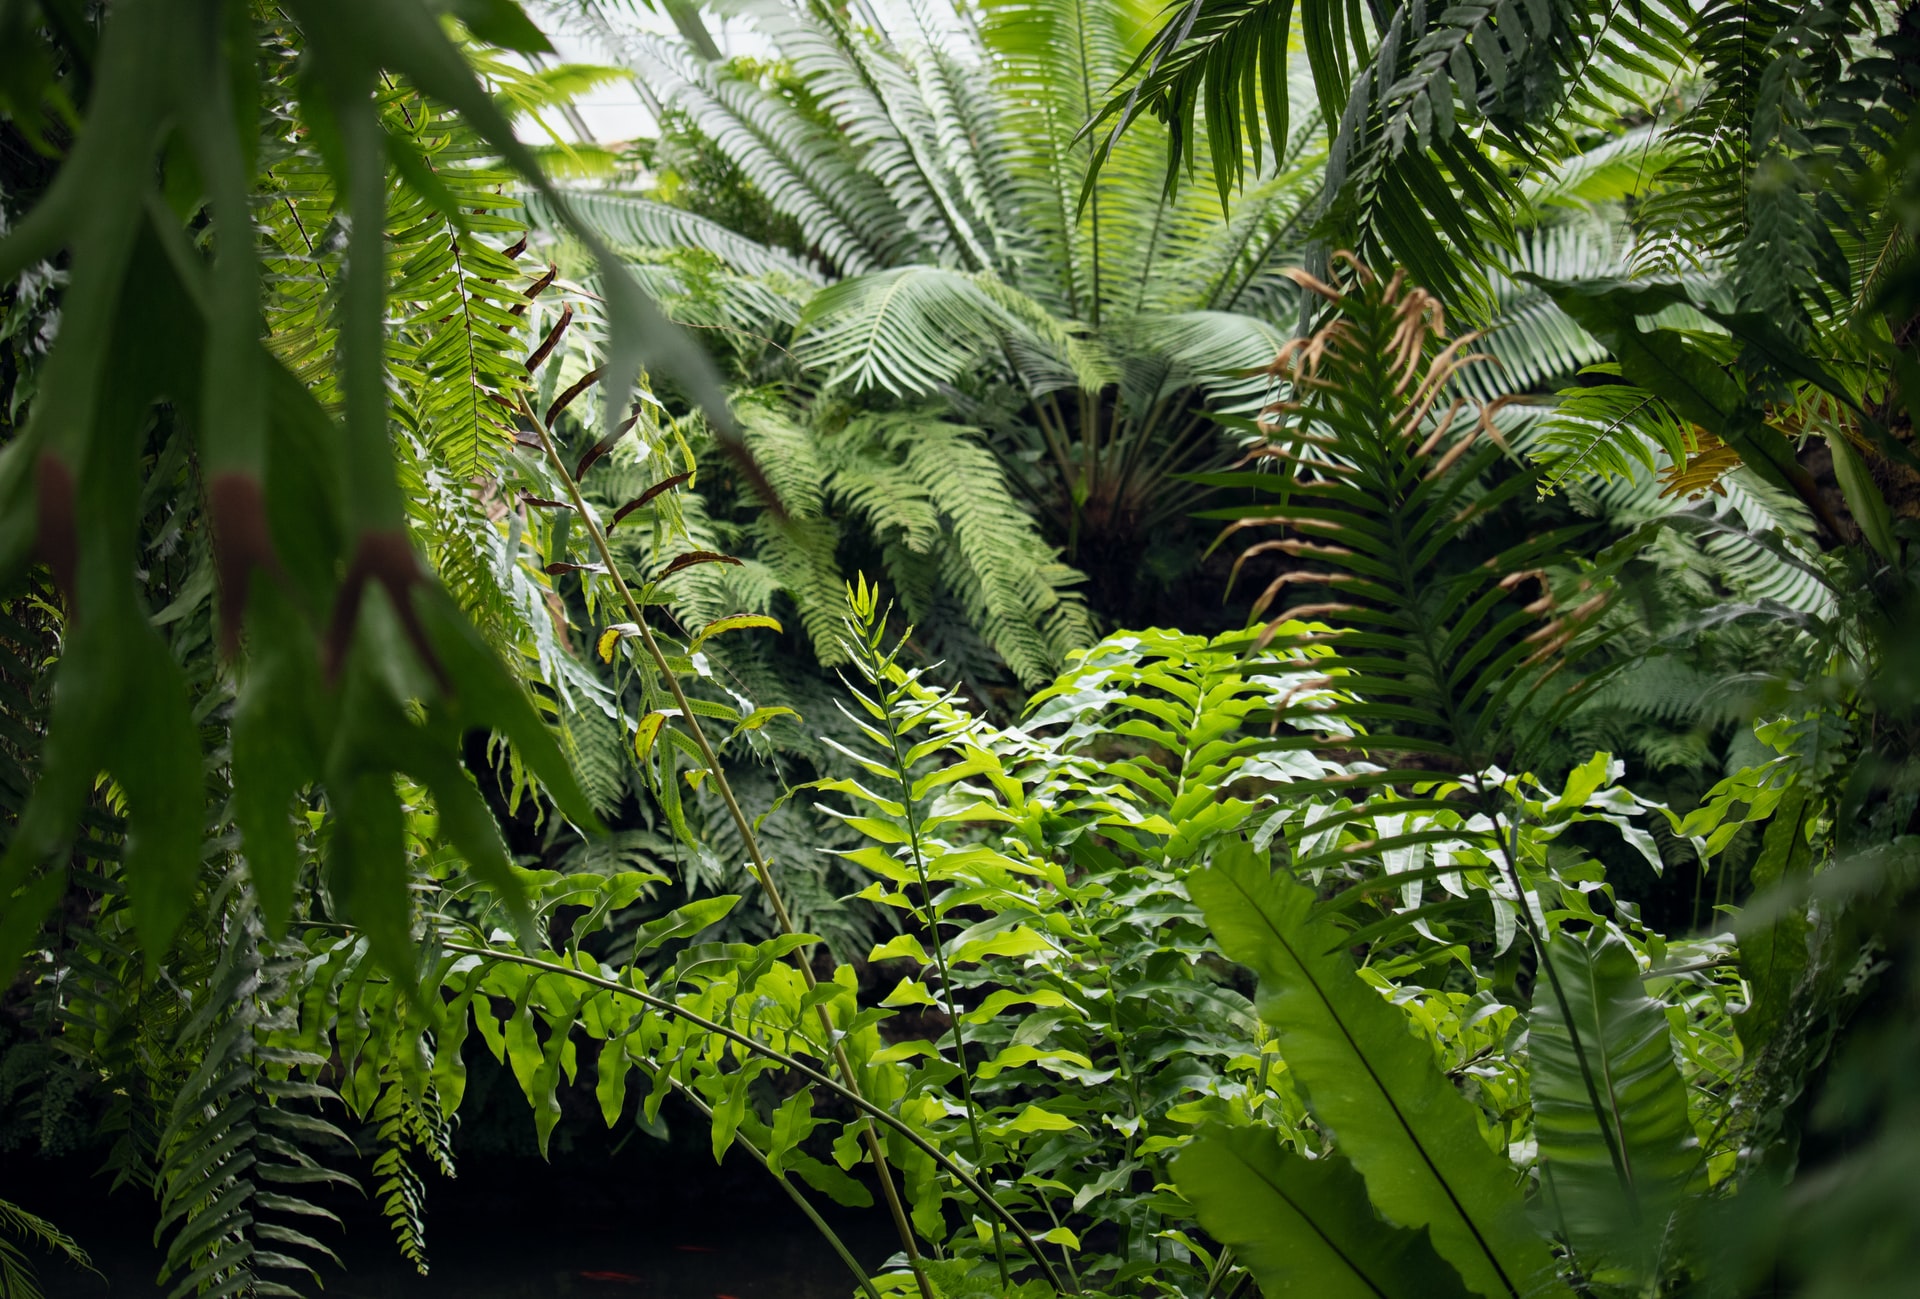 While Away a Sunny Summer Day at Rawlings Conservatory